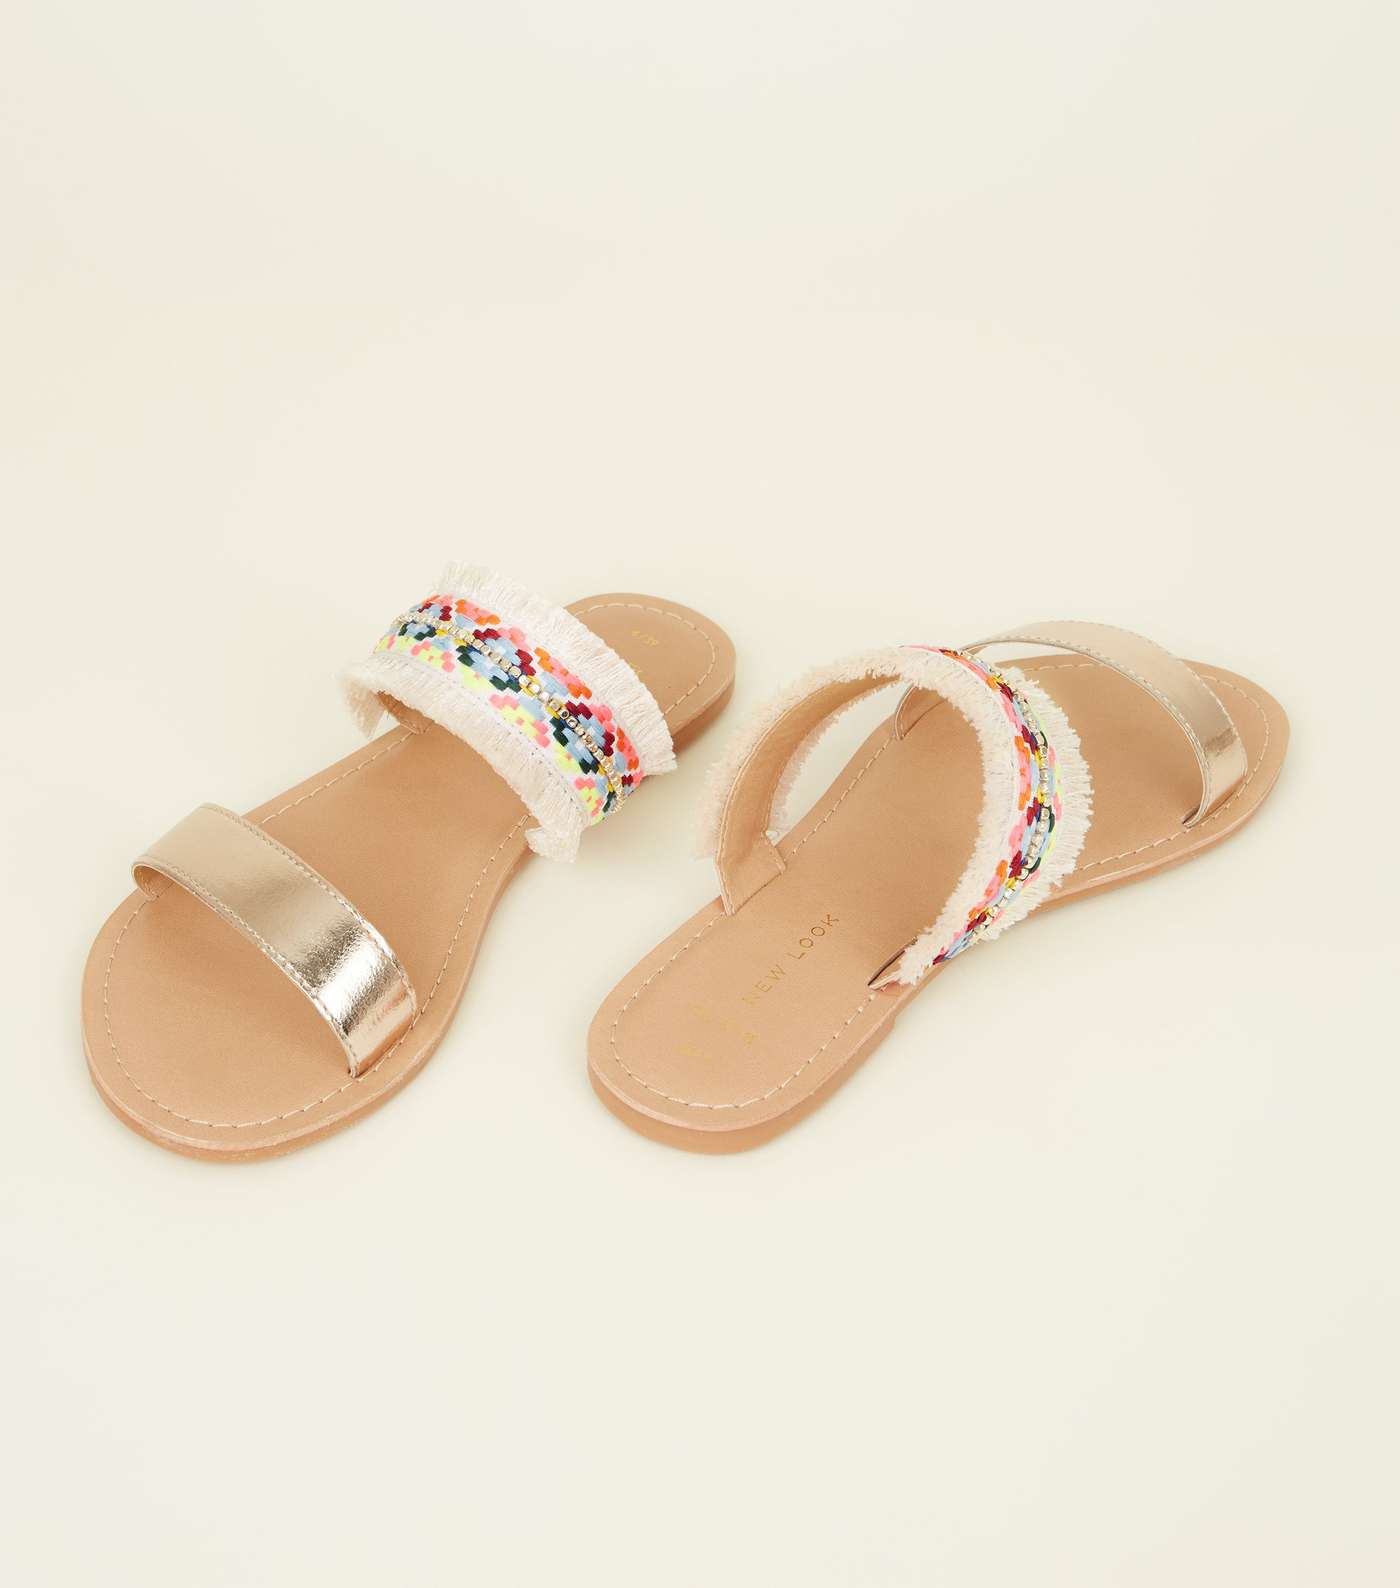 Wide Fit Gold Leather and Woven Strap Sandals Image 3